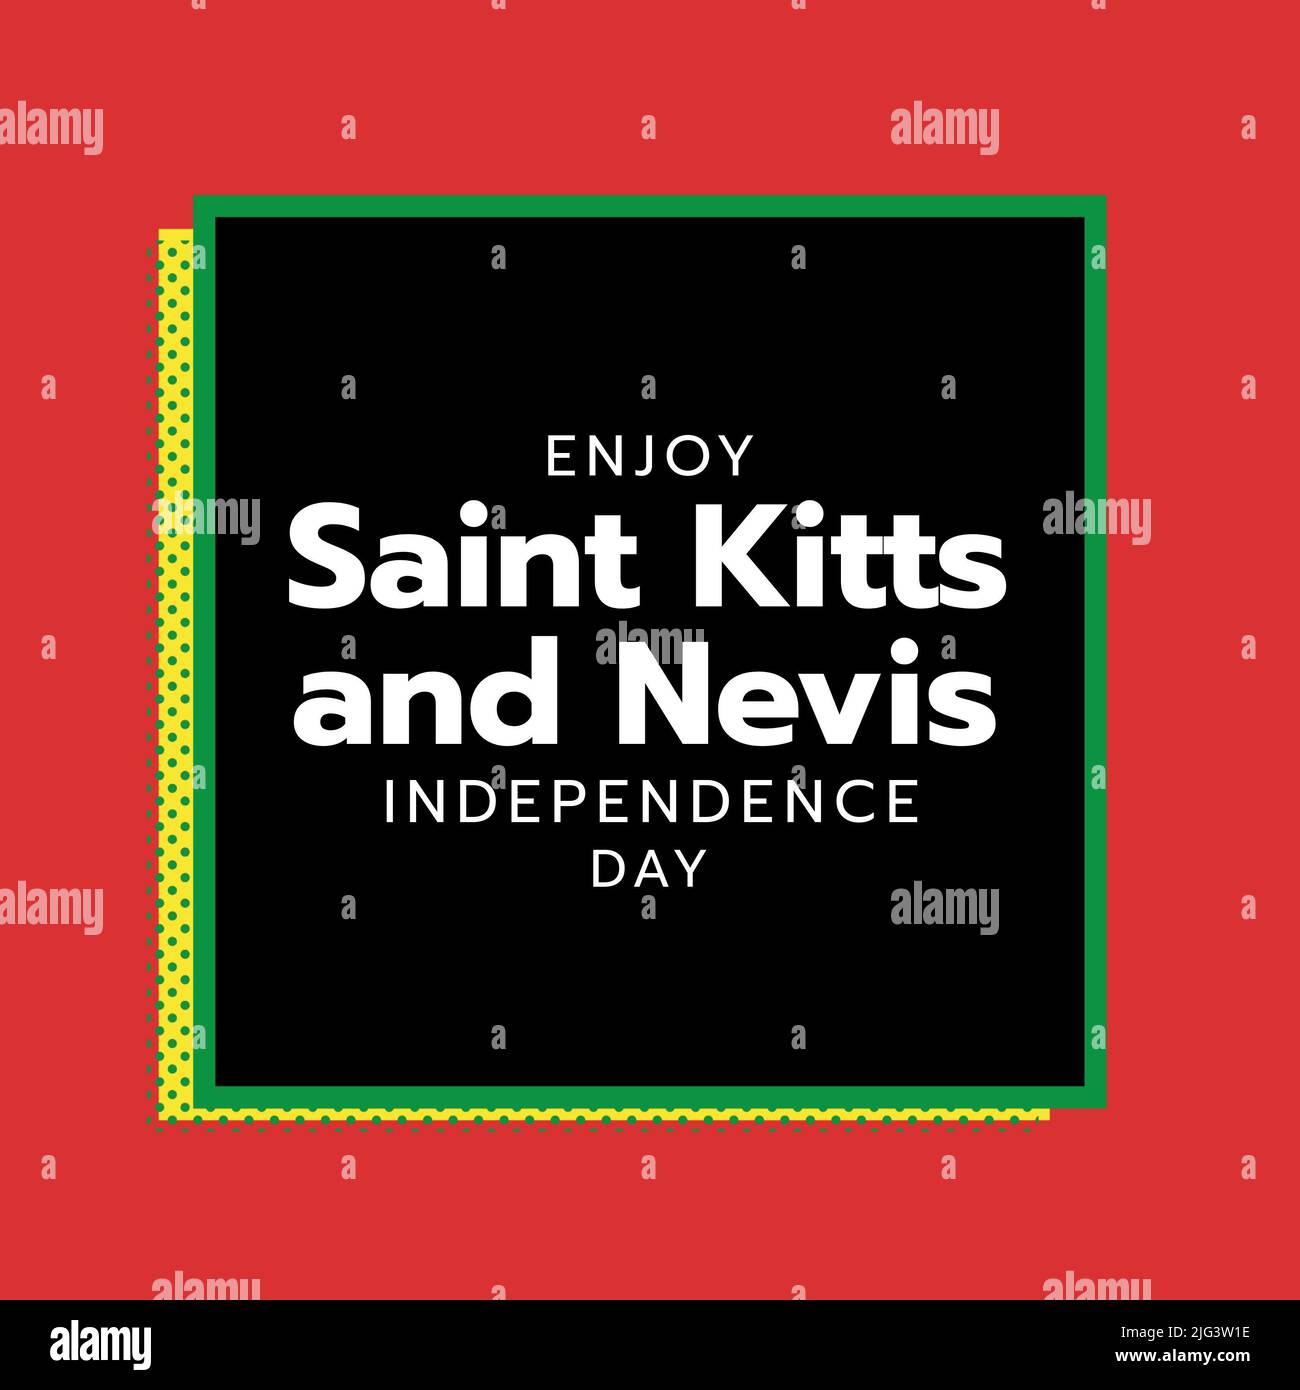 Image of saint kitts and nevis independence day in black square on red background Stock Photo